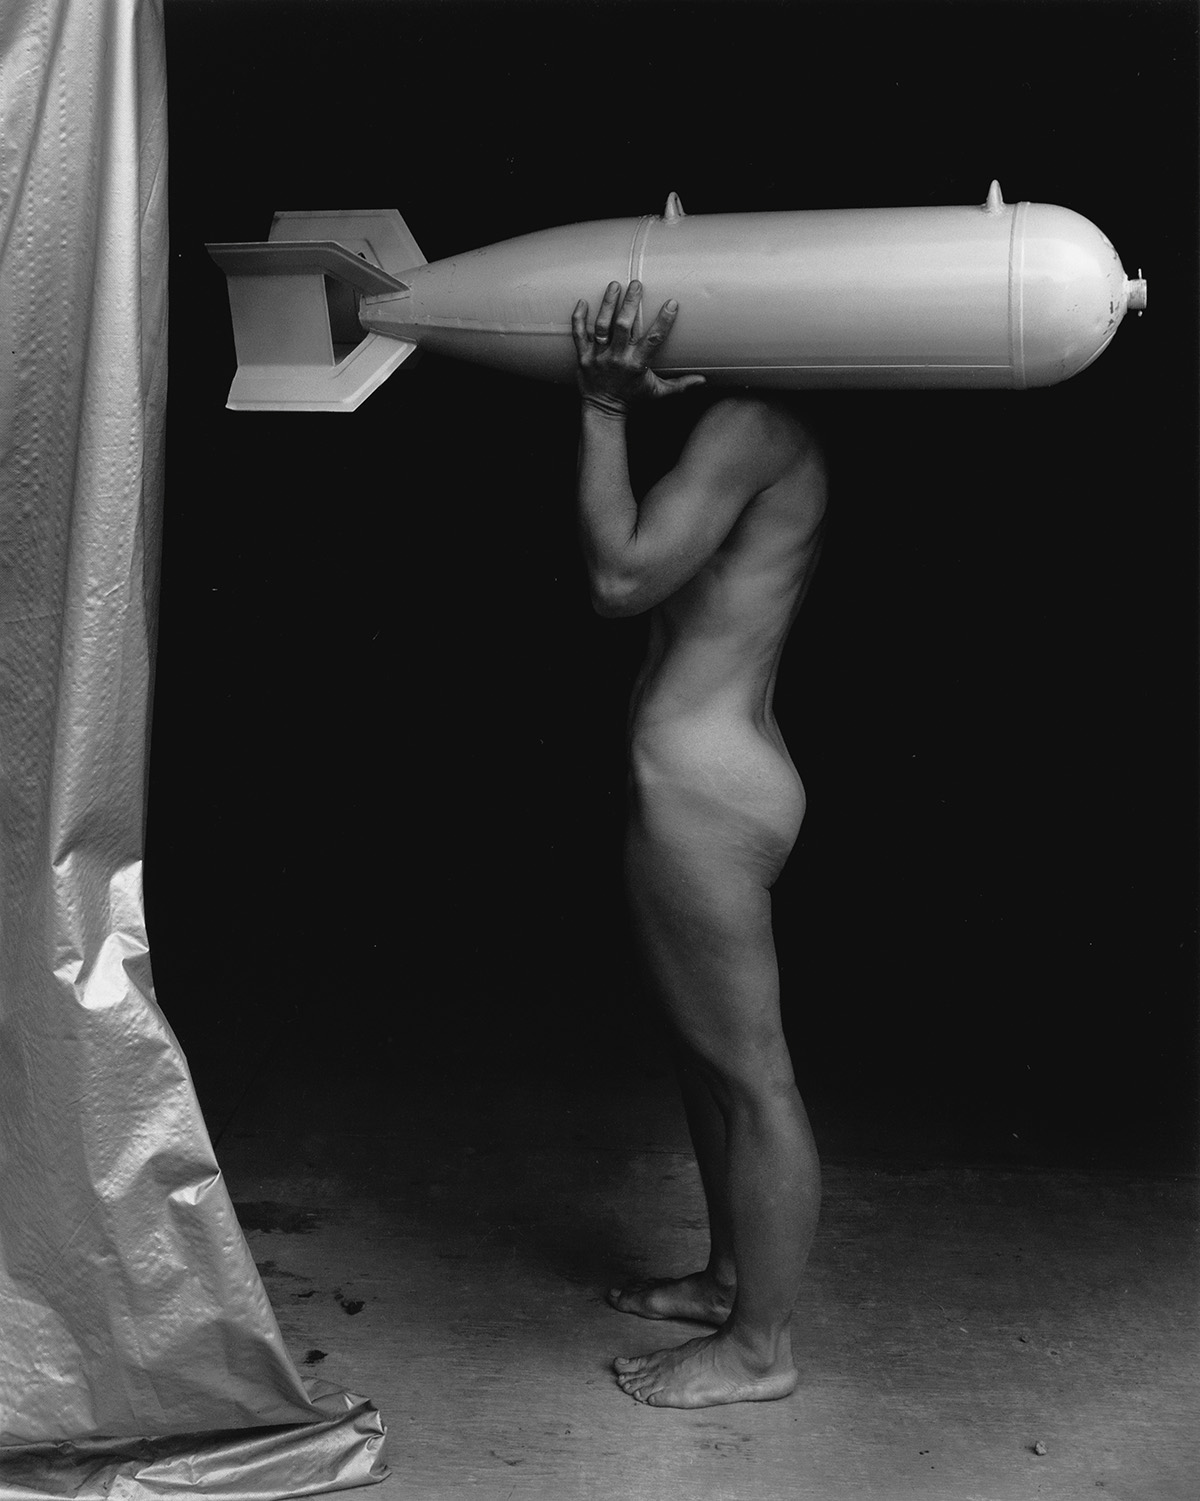 Dater, Judy. "Female figure with a torpedo." Swann Auction Galleries, circa 1975, https://catalogue.swanngalleries.com/Lots/auction-lot/JUDY-DATER-(1941--)-Female-figure-with-a-torpedo?saleno=2499&lotNo=209&refNo=753514. Accessed 4/1/24.